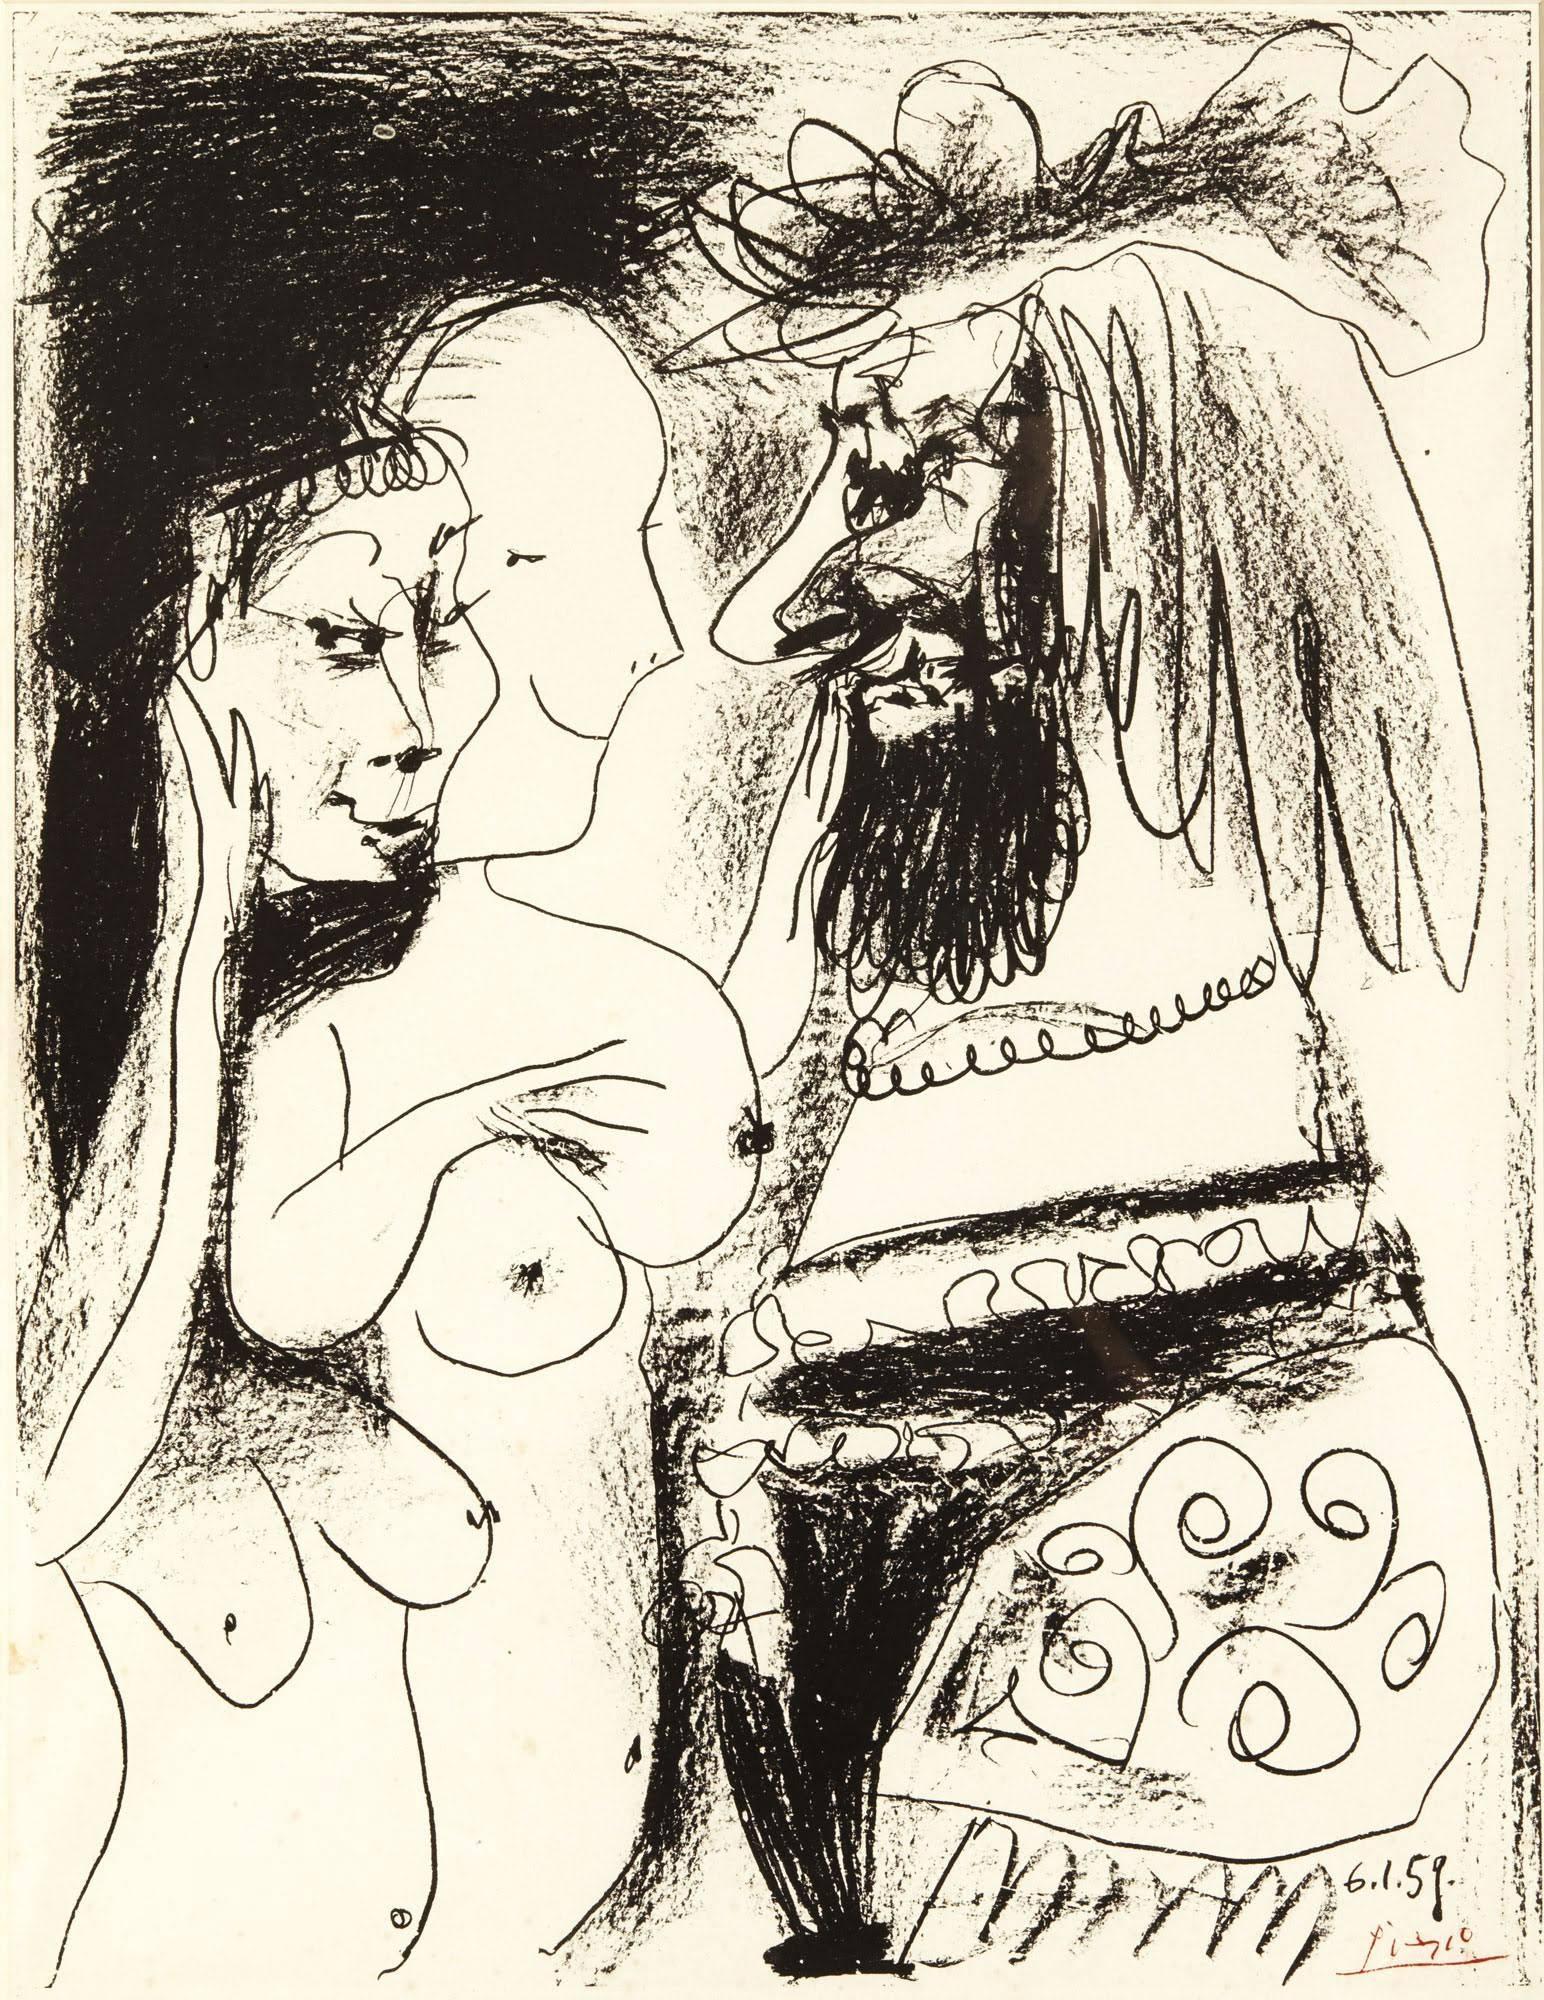 Pablo PICASSO (1881-1973) 
The Old King, 1959 
(Le Vieux Roi)
Framed artwork
Signed in the stone
Original Lithograph
Dimensions: 65 x 49 cm
References: Bloch 869, Mourlot 317

Picasso is not just a man and his work. Picasso is always a legend,